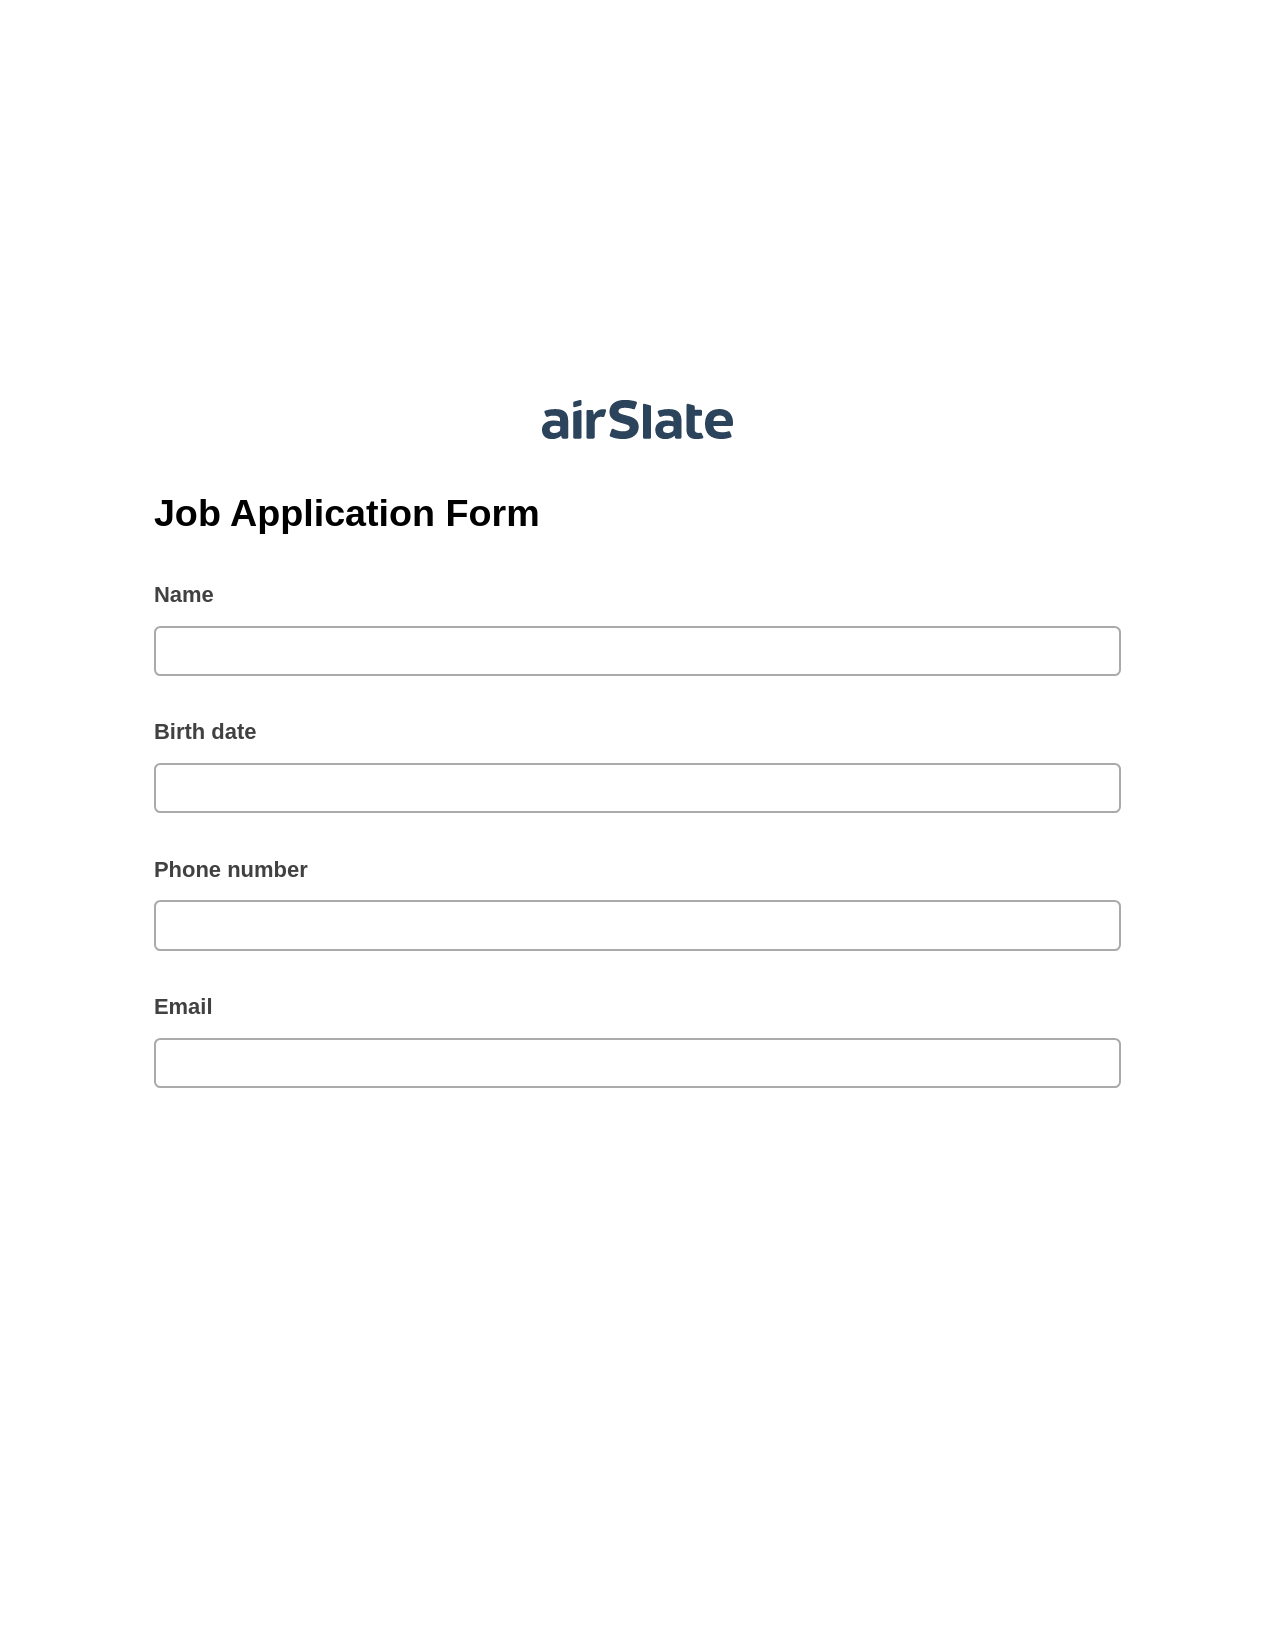 Multirole Job Application Form Pre-fill Document Bot, Create MS Dynamics 365 Records Bot, Export to Formstack Documents Bot